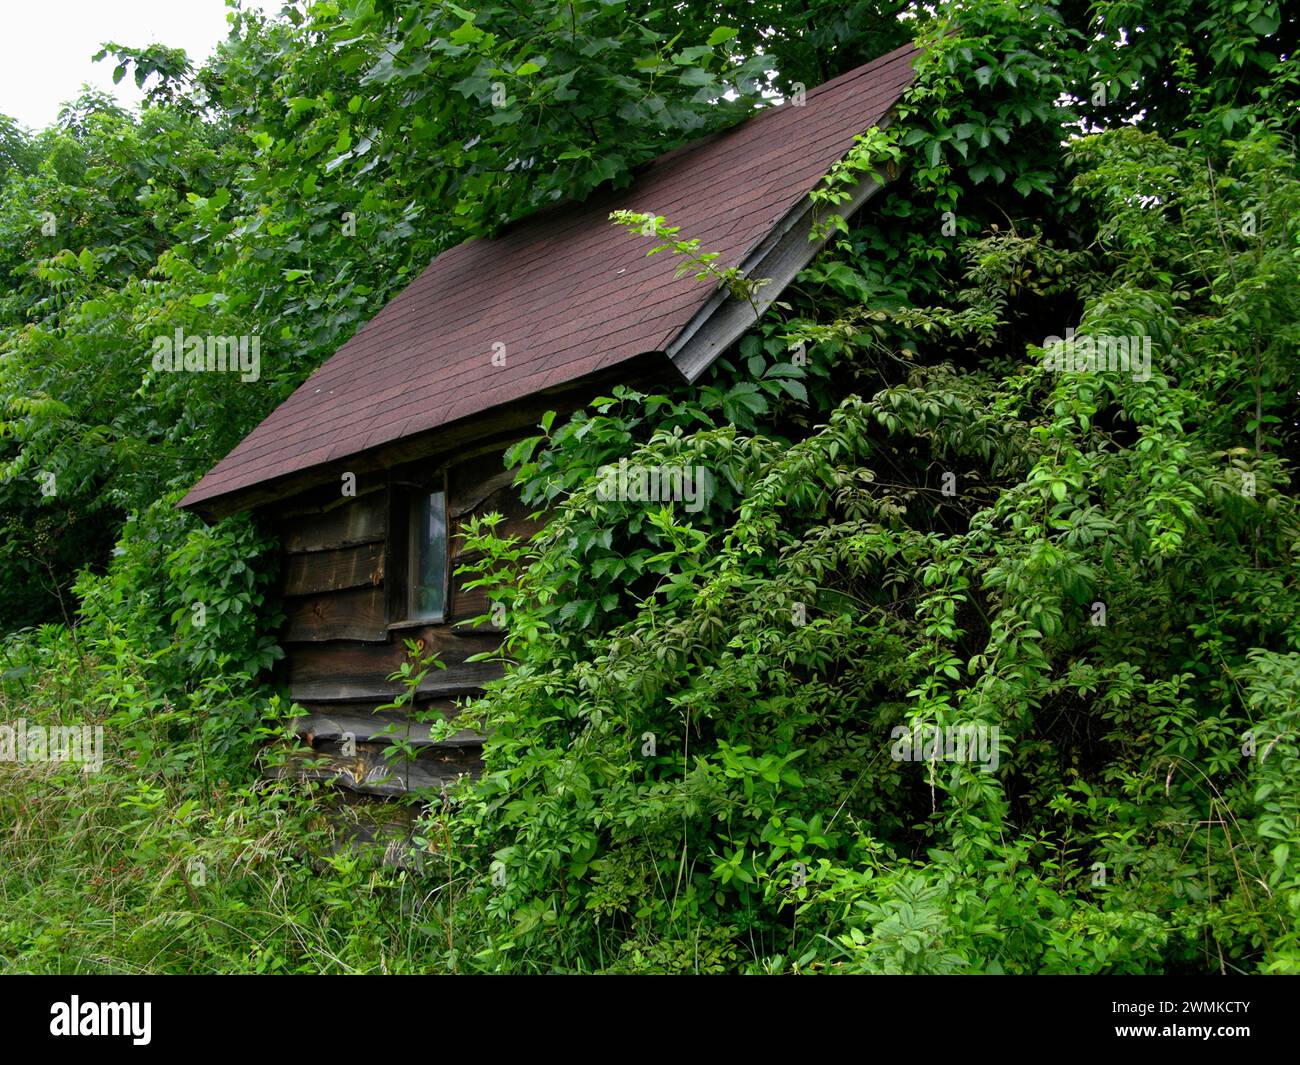 Rustic cabin with wood sided walls and overgrown weeds and plants Stock Photo